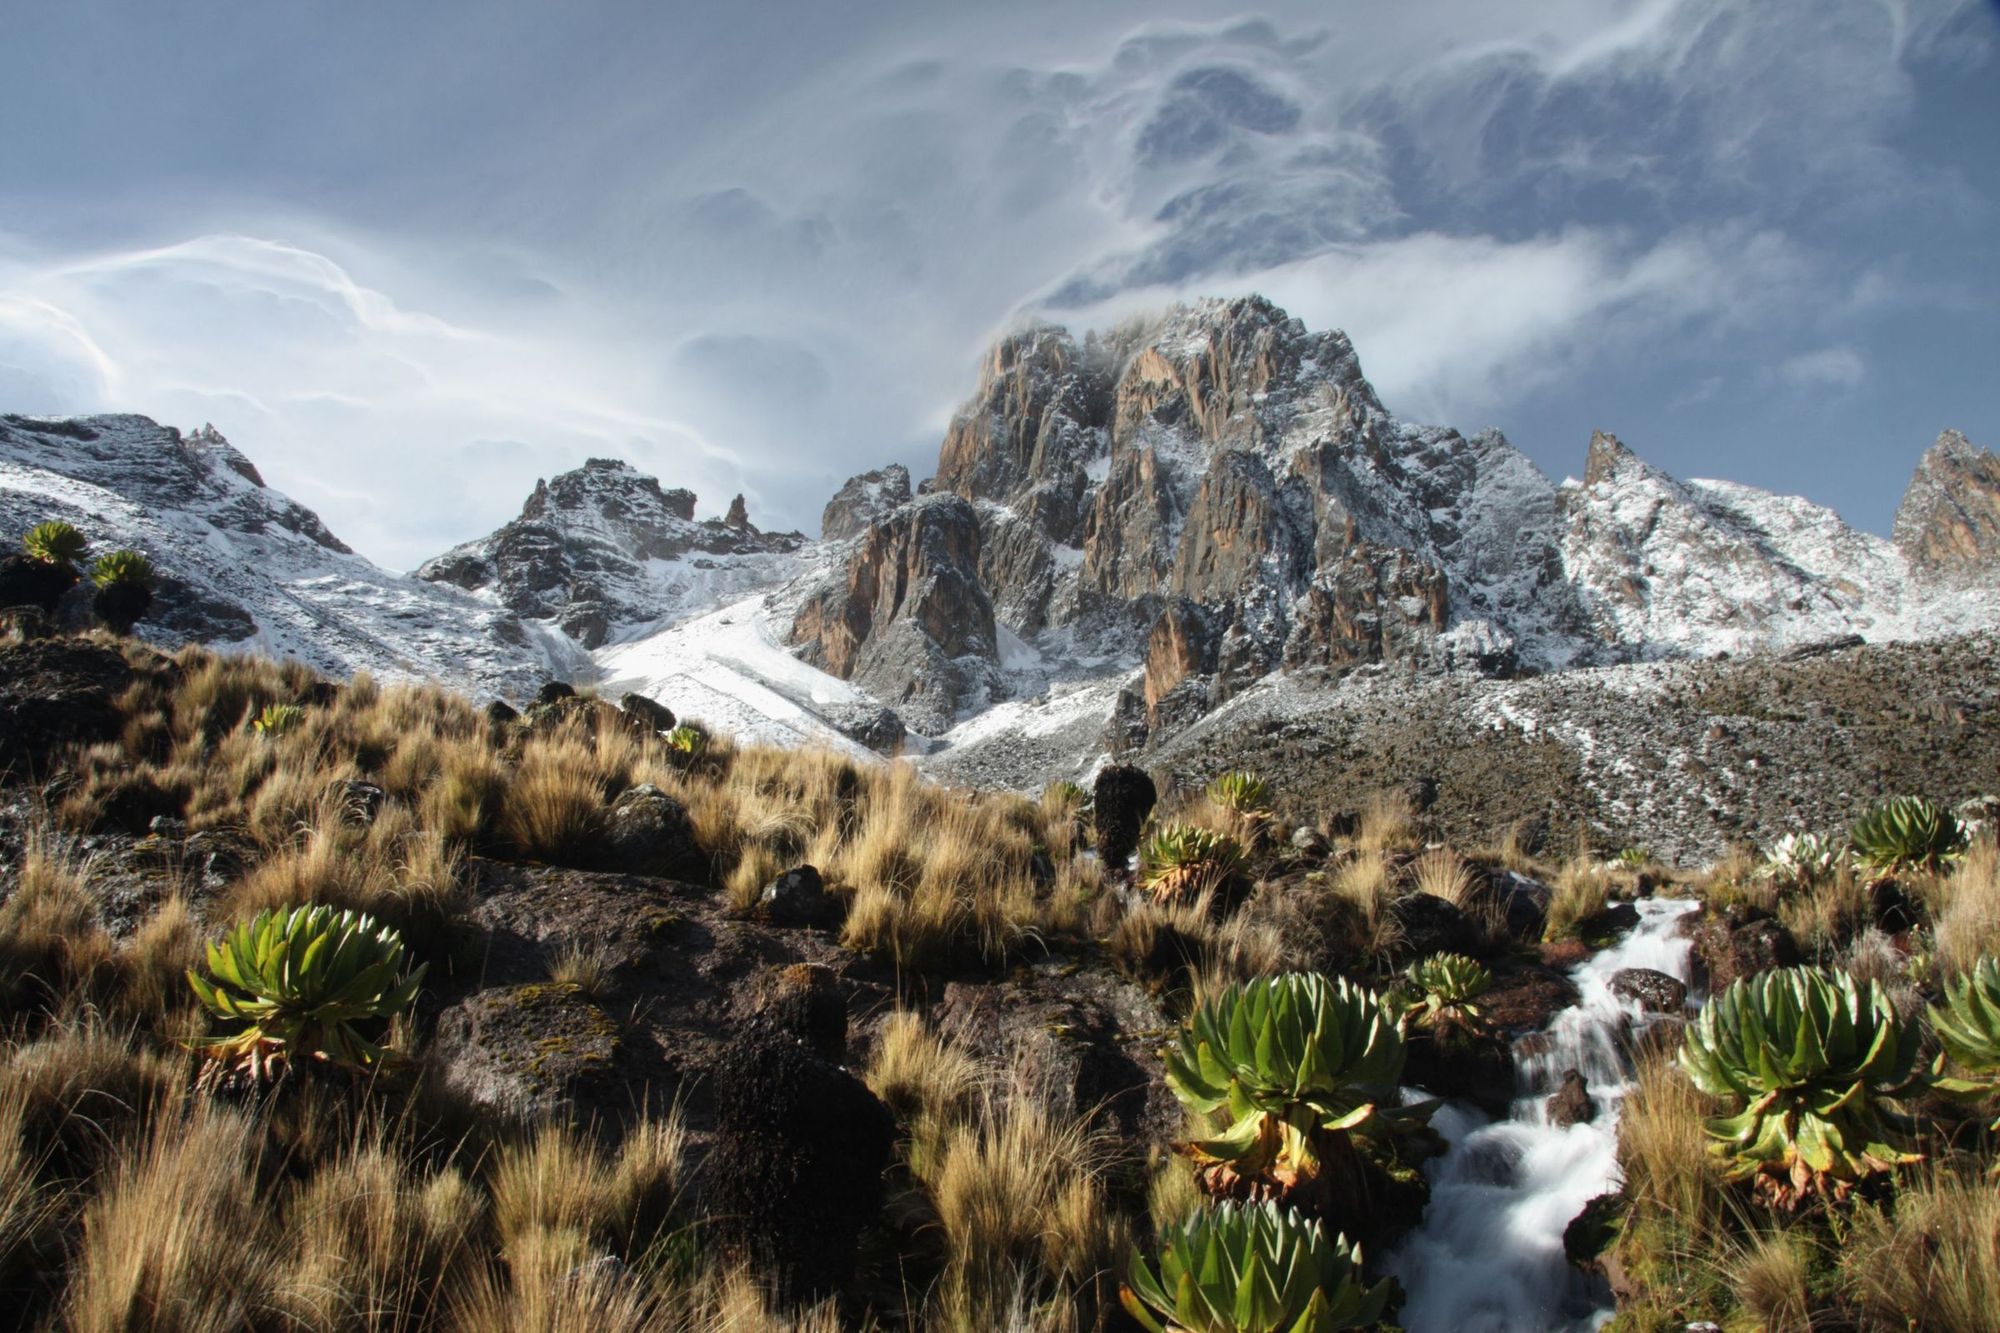 The Chigoria Route up Mount Kenya. Photo: Getty.